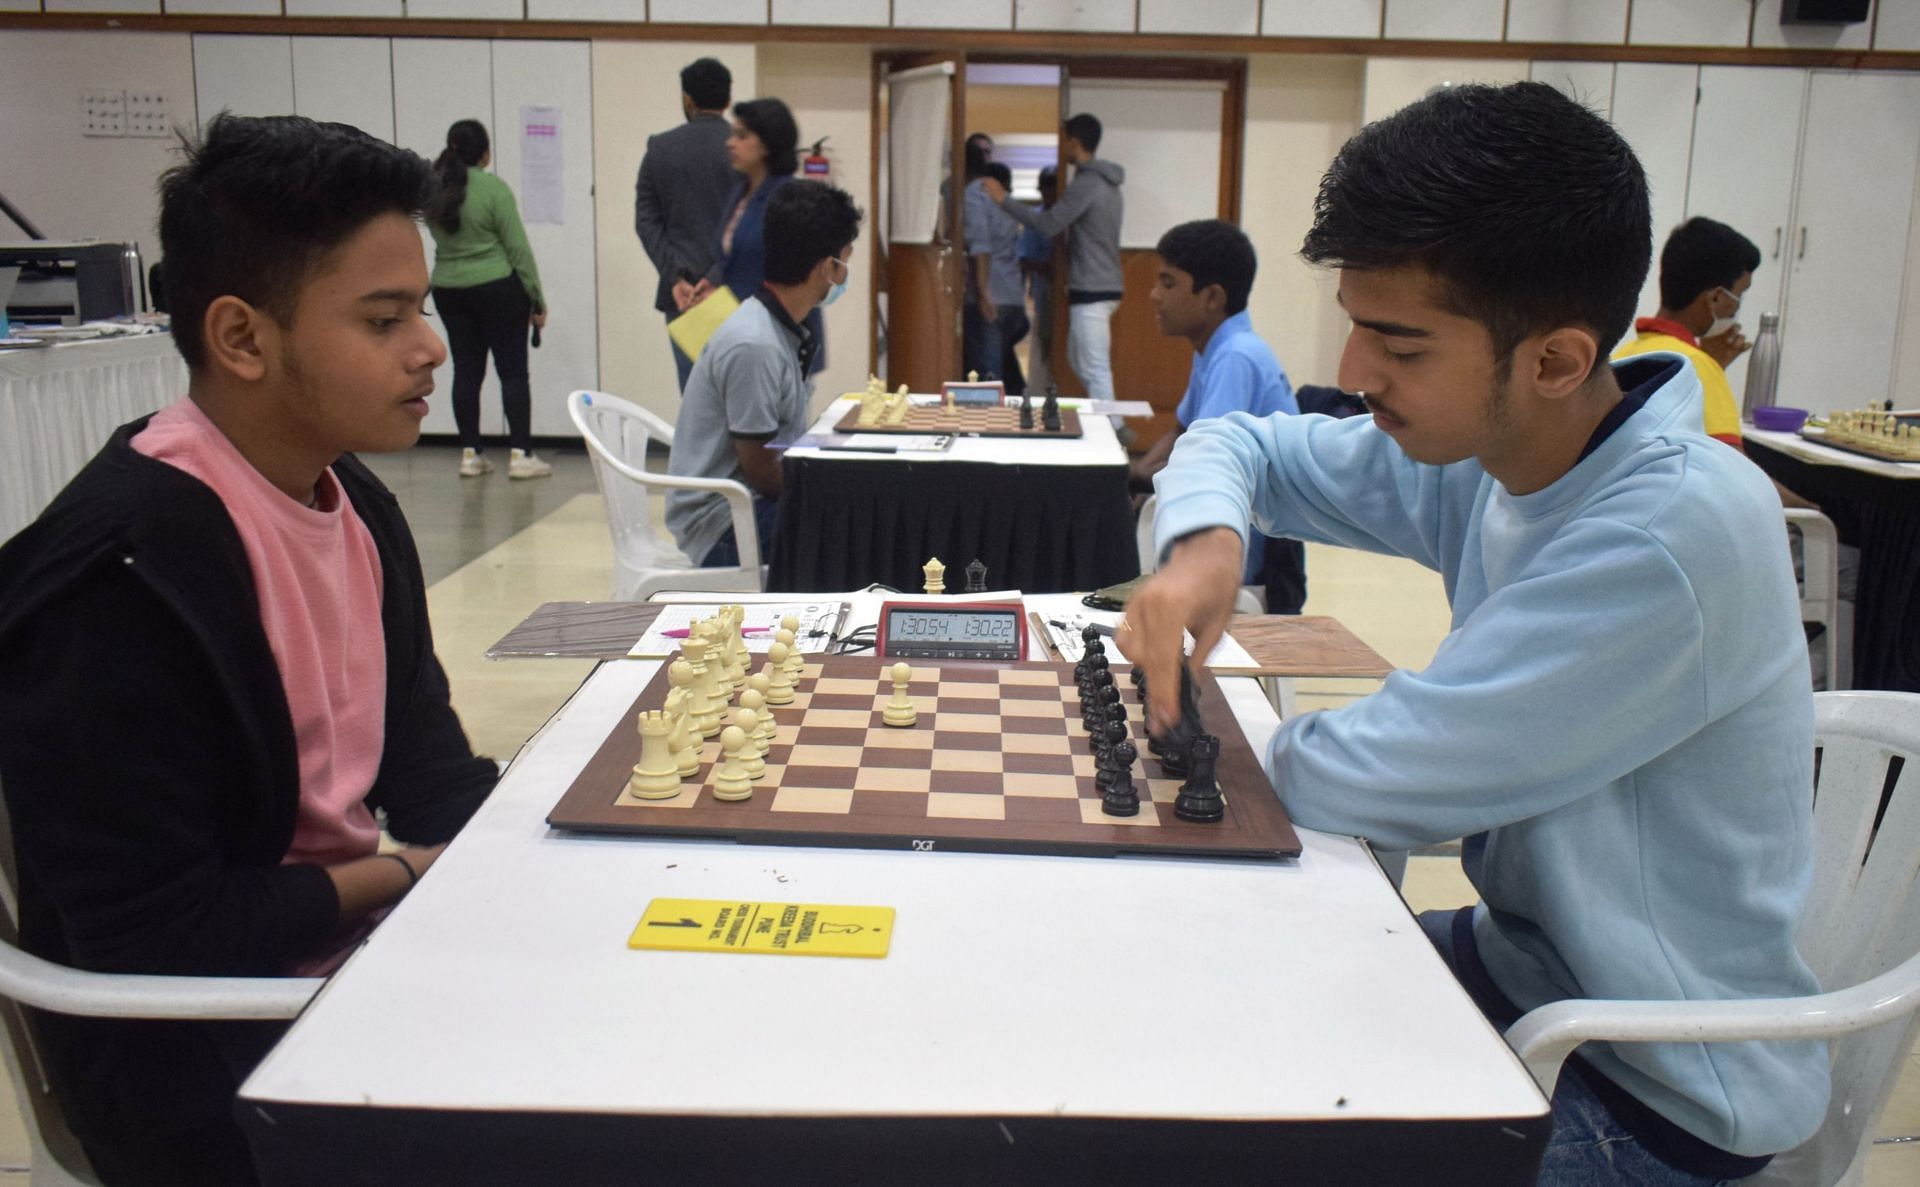 Rishabh Gokhale (R) makes a move against Vrashank Chouhan in the fifth round in Pune on Friday. (Pic credit: AICF)